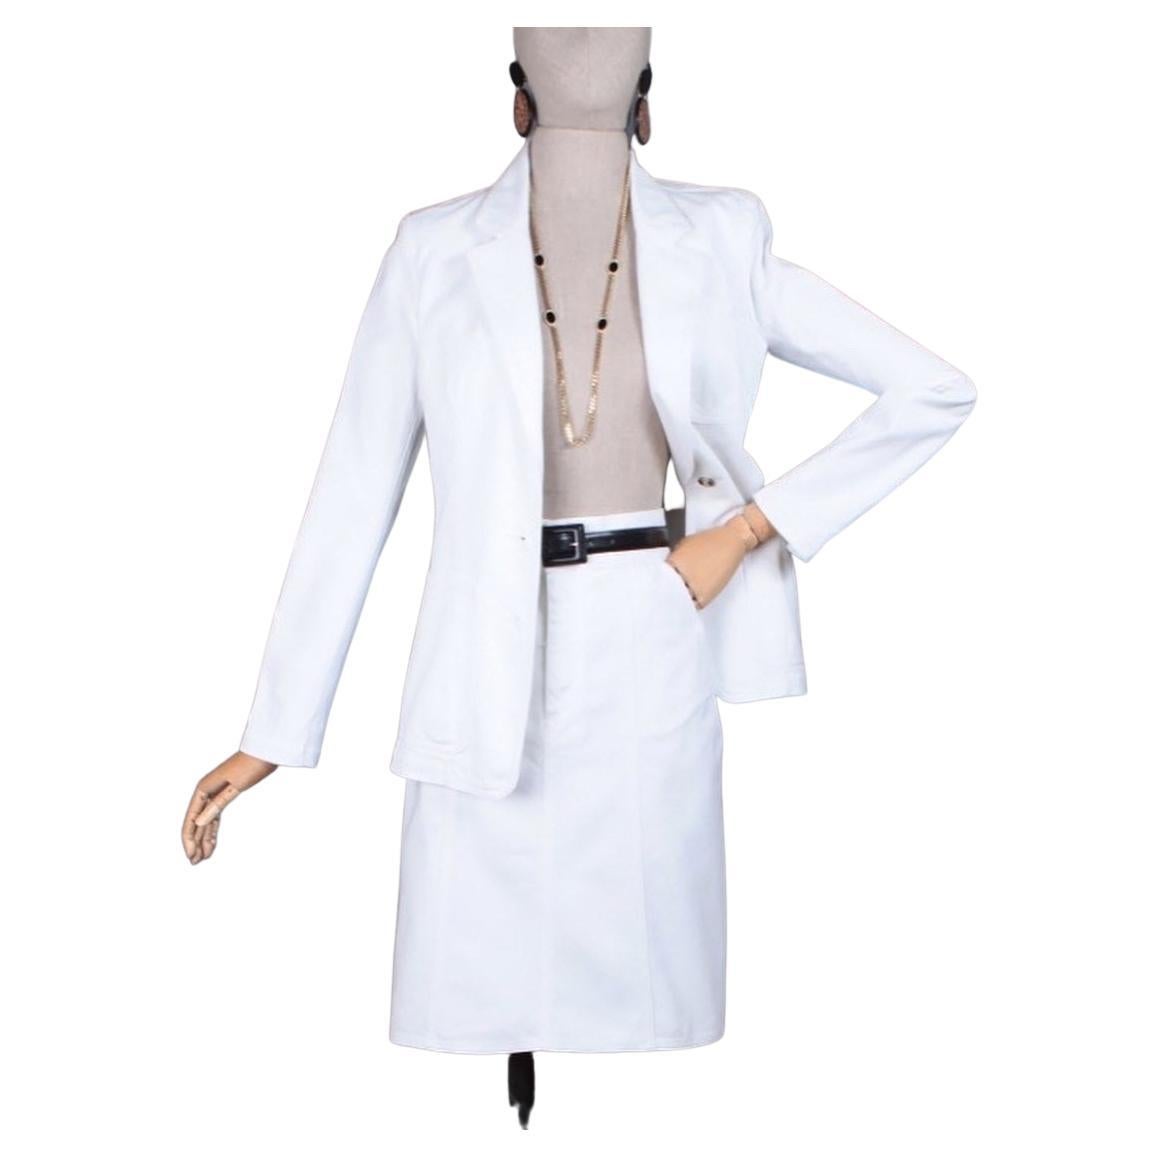 This chic and timeless white Yves Saint Laurent Rive Gauche suit would be perfect for a courthouse wedding, honeymoon, or any occasion at all. Appears to have never been worn. (Belt just to show style, not included.) Made in Italy. White blazer is